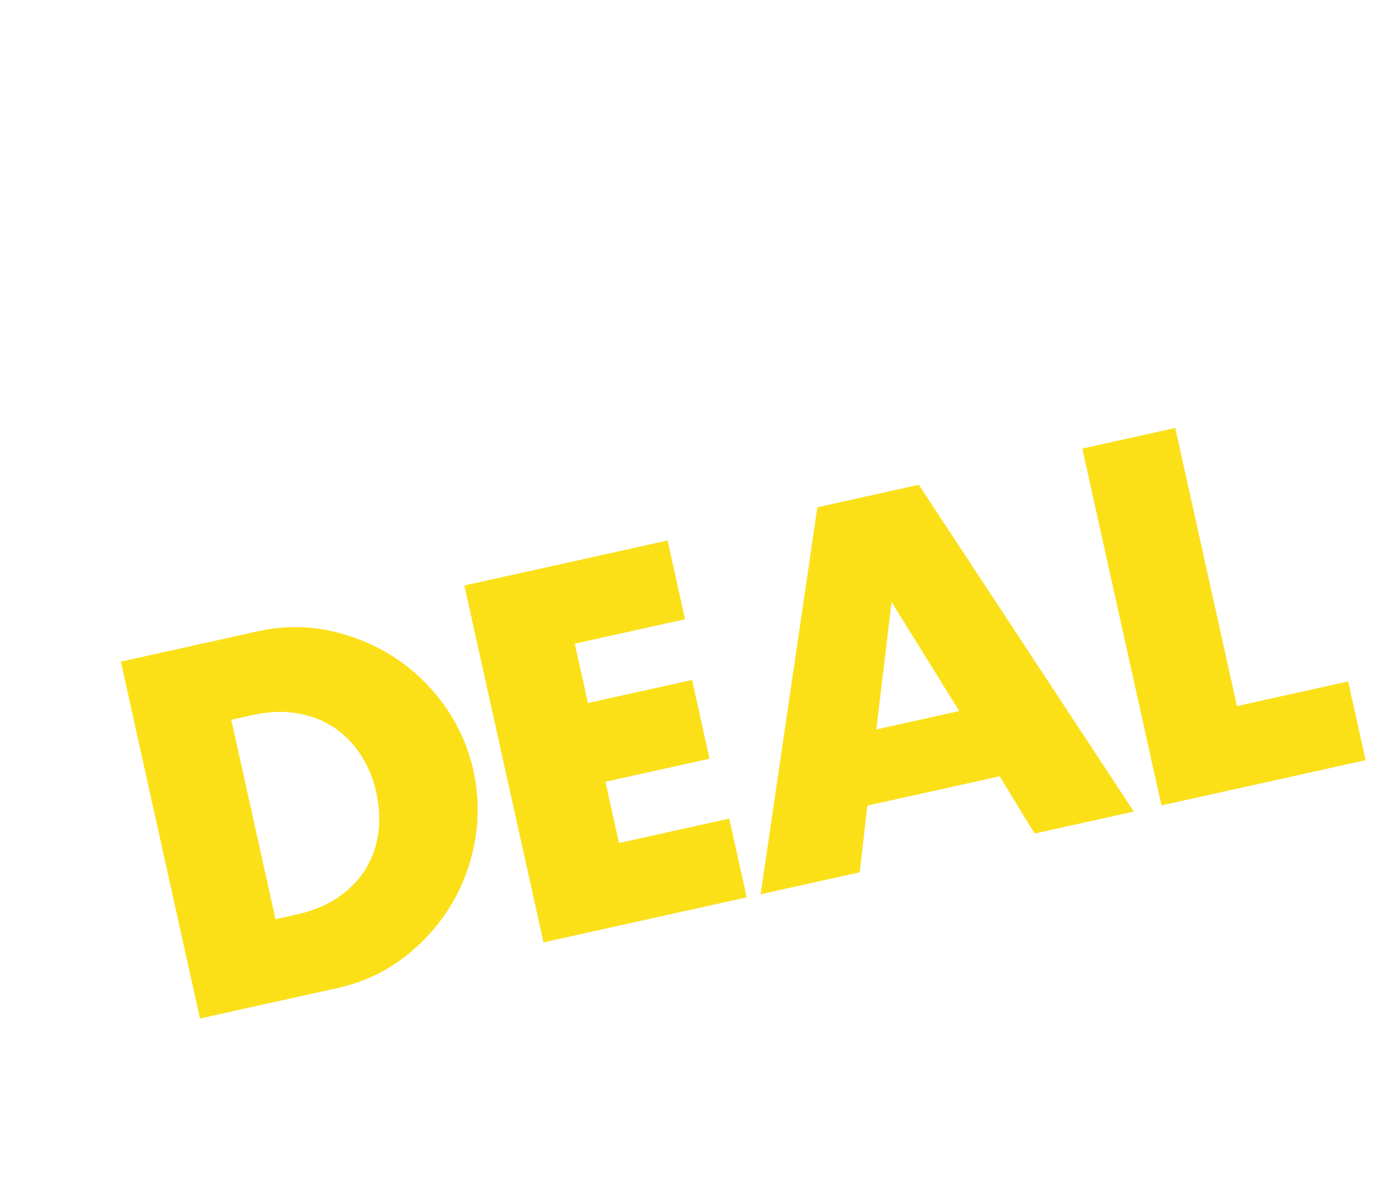 Real Deal Sales Event